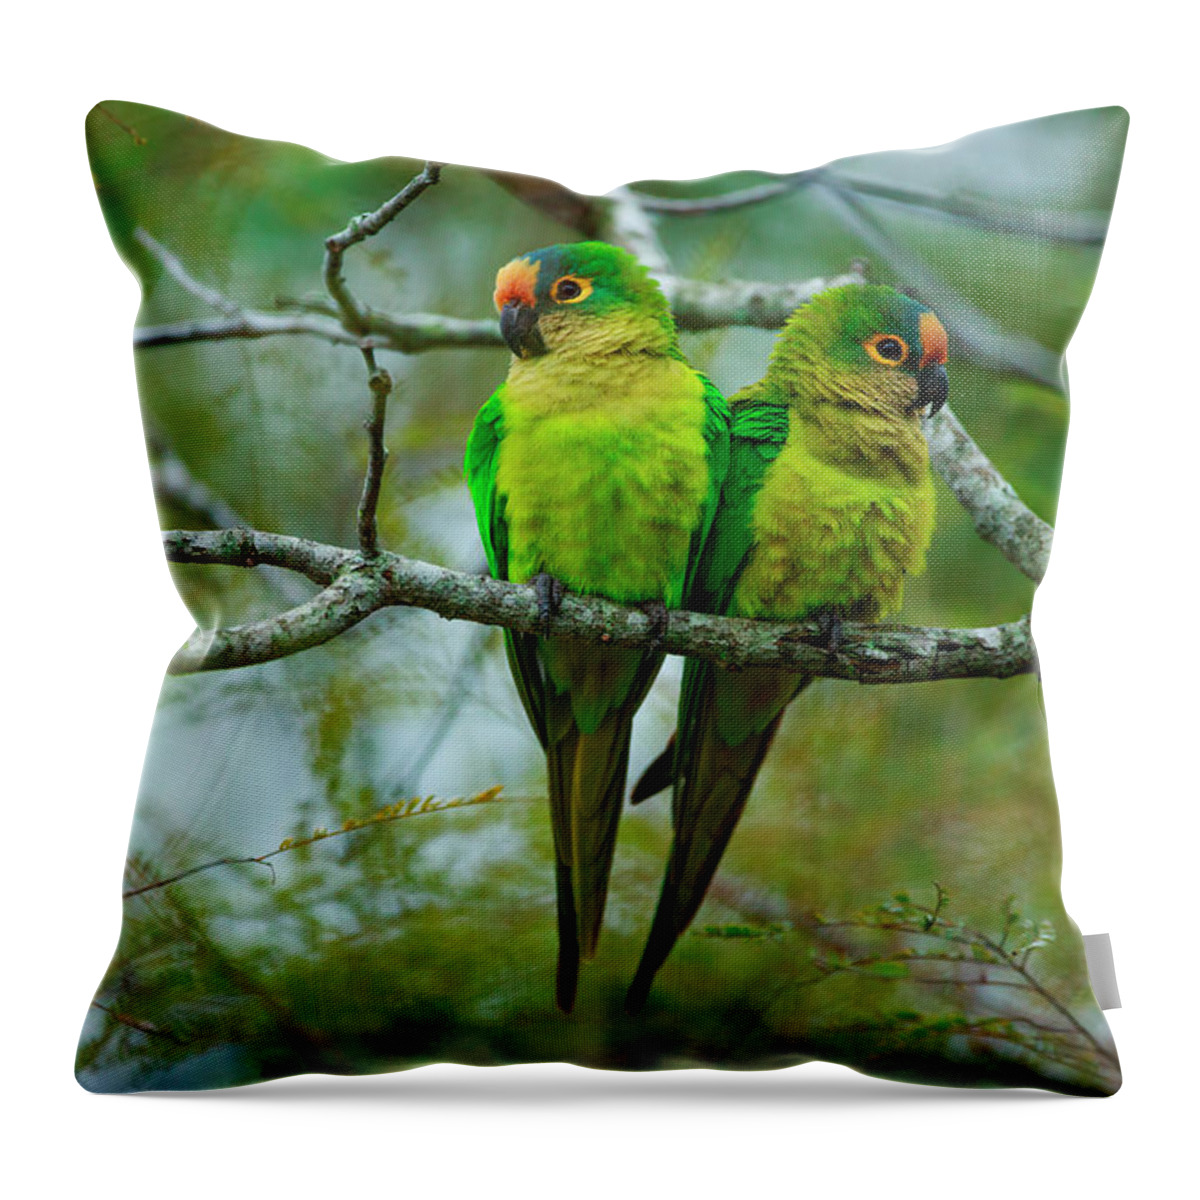 Vertebrate Throw Pillow featuring the photograph Peach-fronted Parakeets, Aratinga by Mint Images/ Art Wolfe